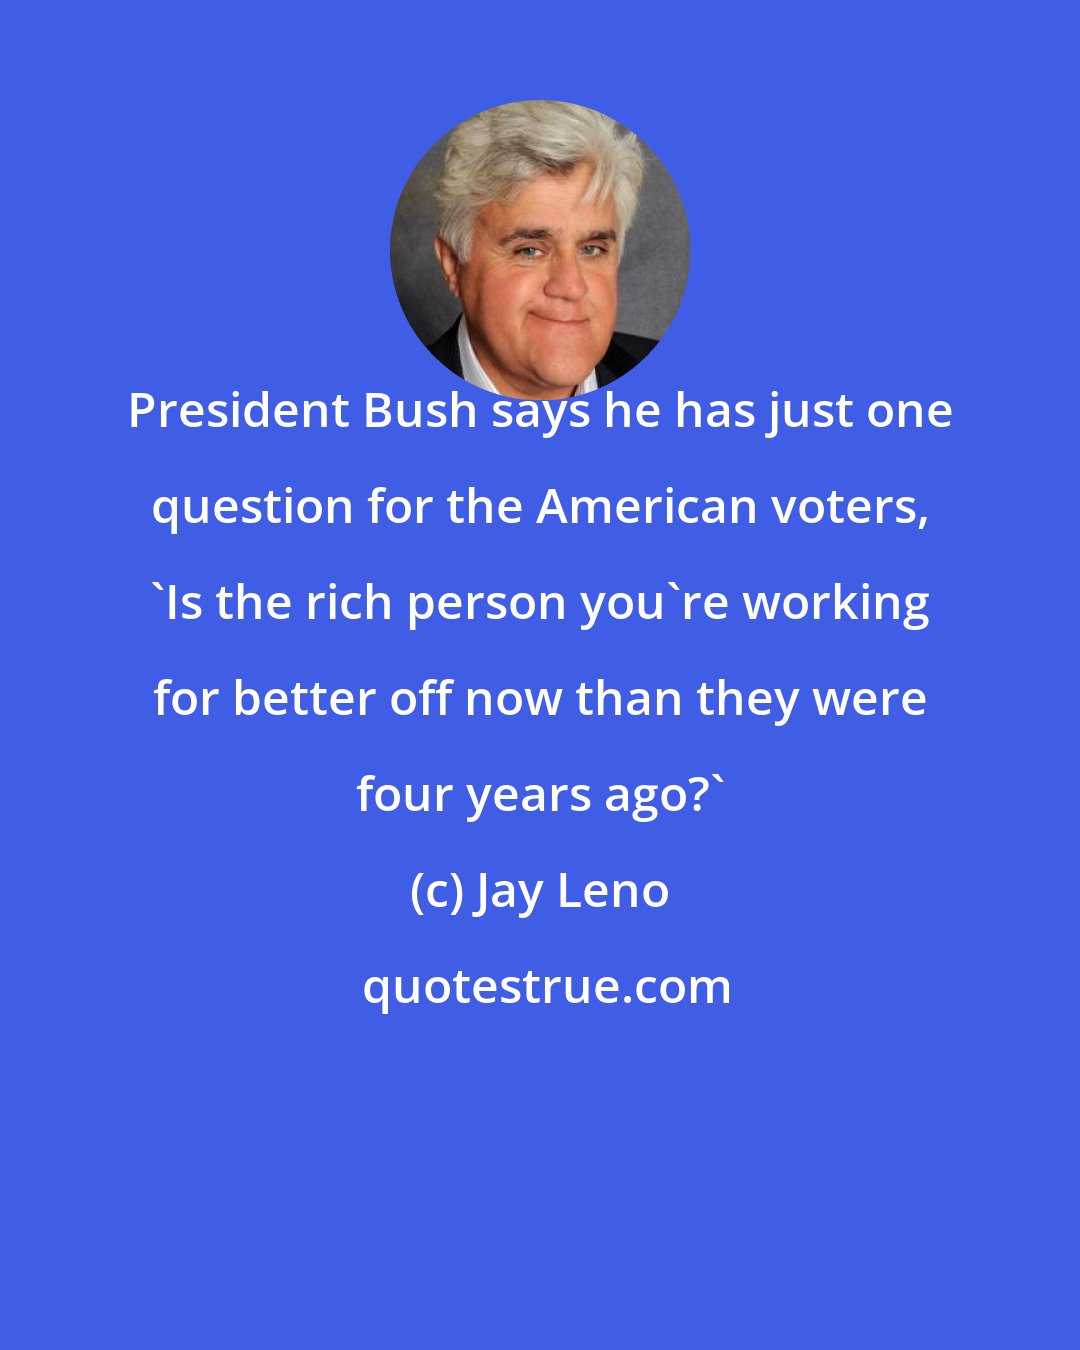 Jay Leno: President Bush says he has just one question for the American voters, 'Is the rich person you're working for better off now than they were four years ago?'